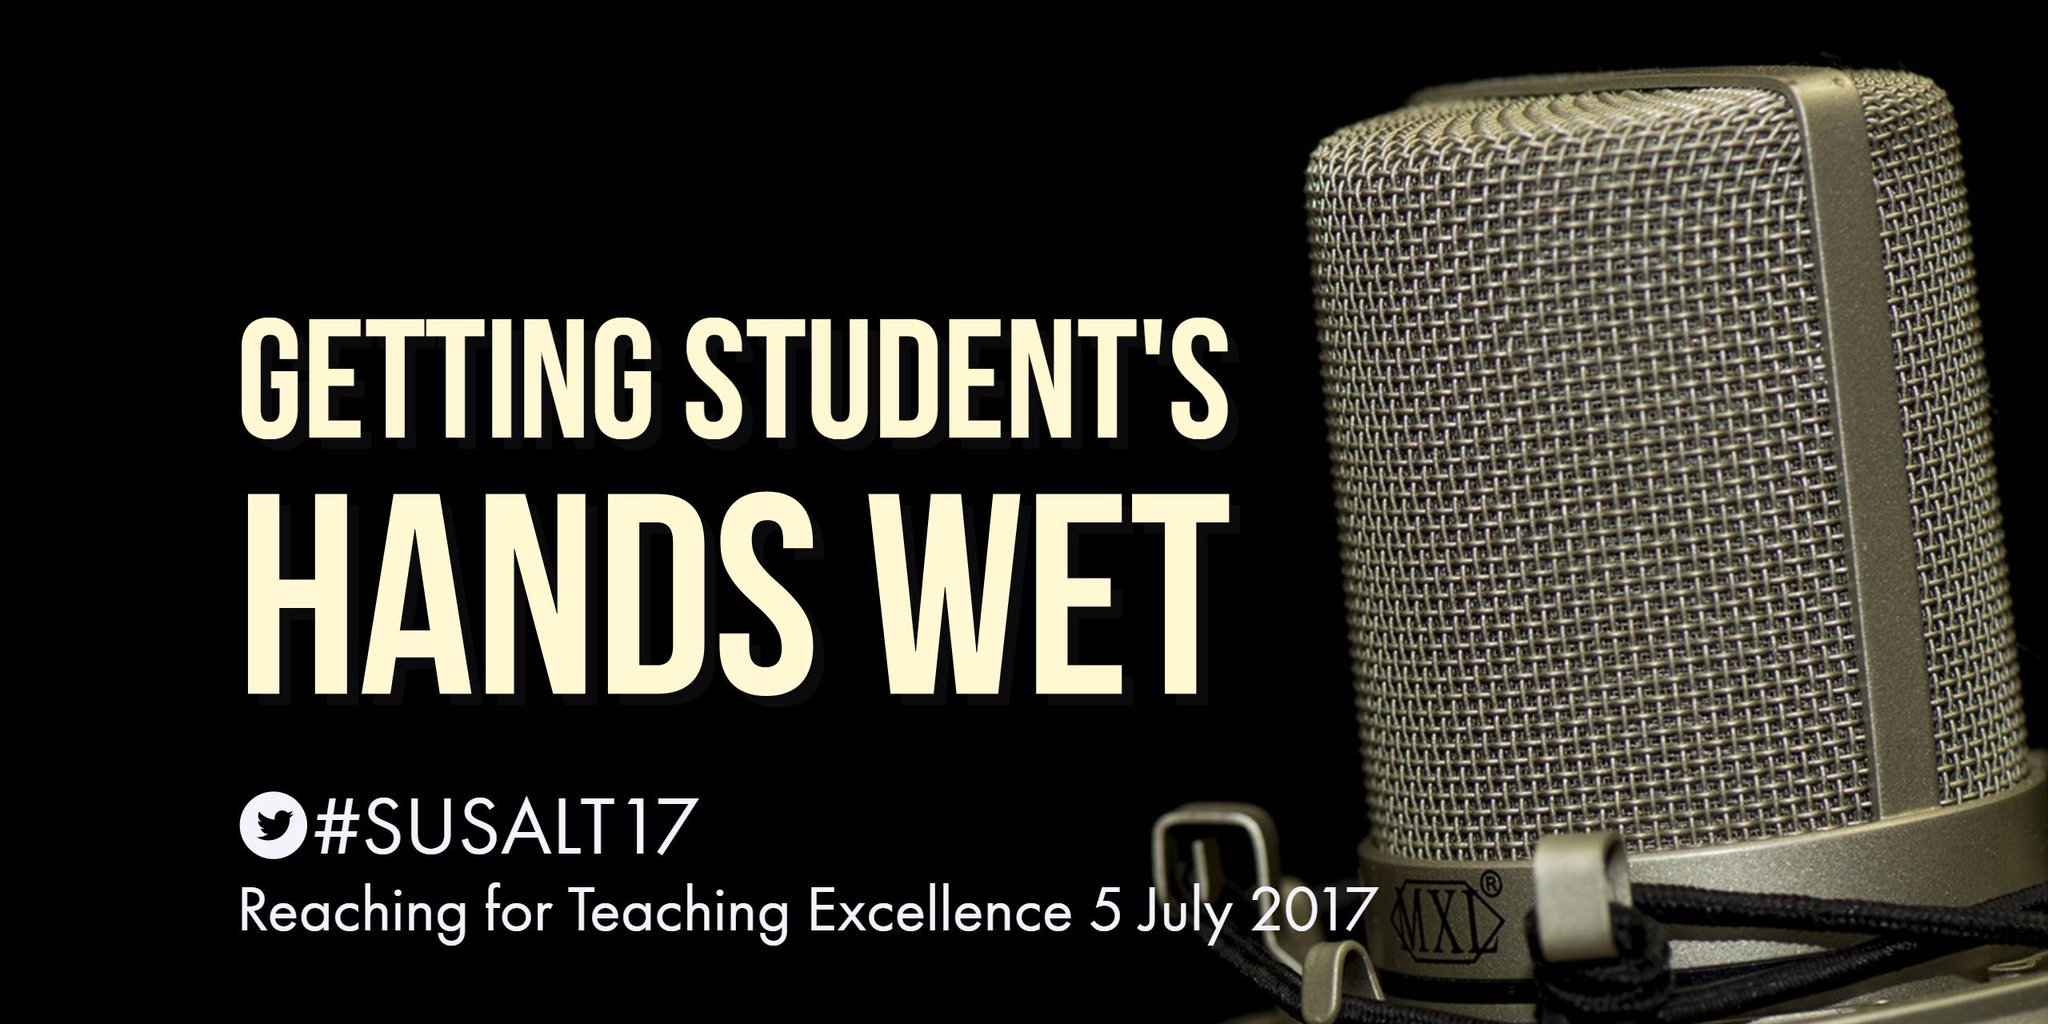 Explore how our research facilities enhance student learning with @sciencetell #SUSALT17 https://t.co/gemCaAnT7e https://t.co/7XLWuTSado